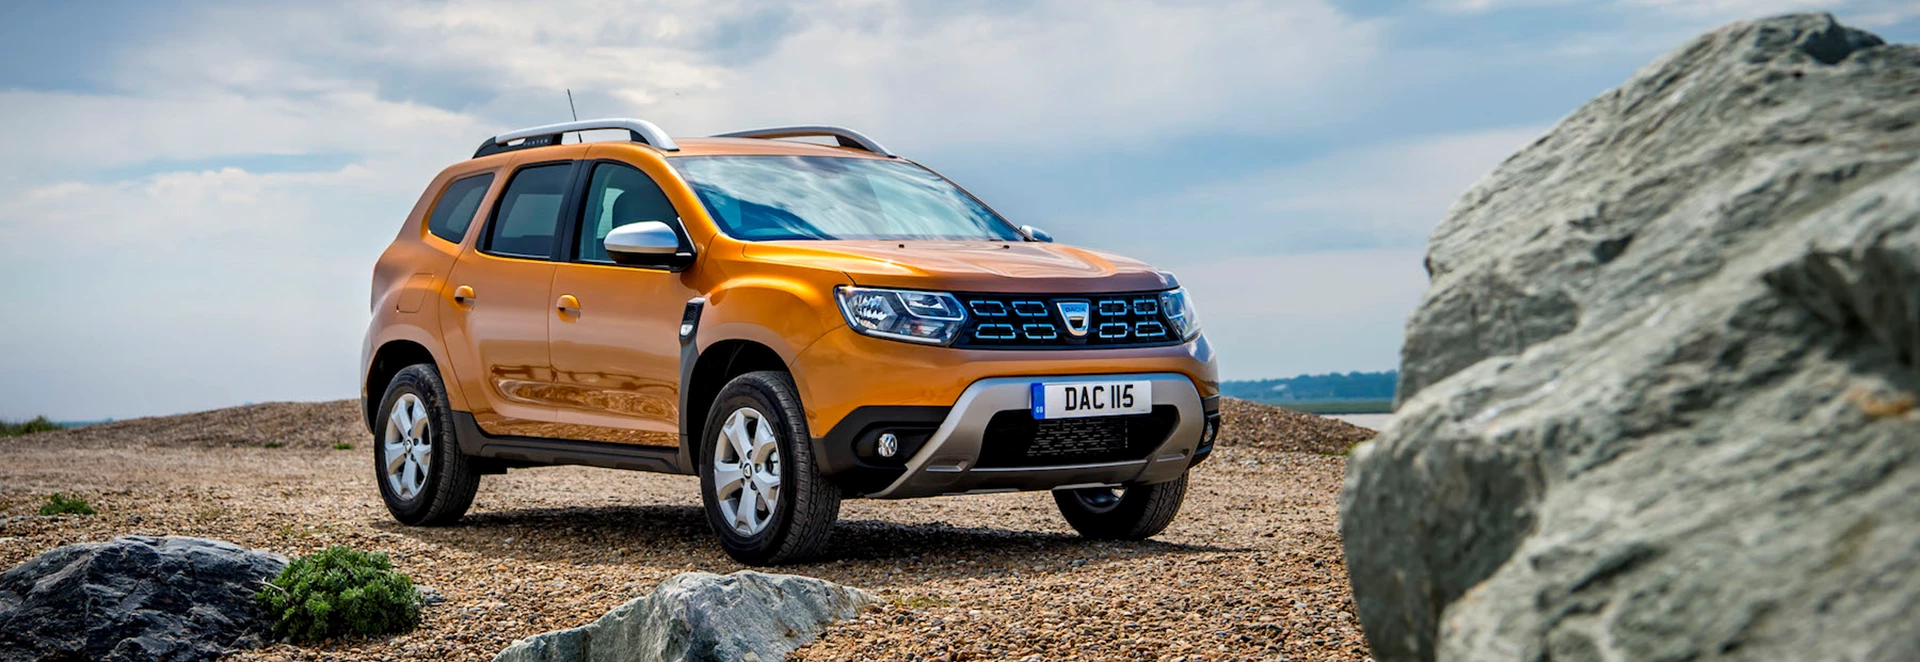 Is a new Dacia EV on the way?